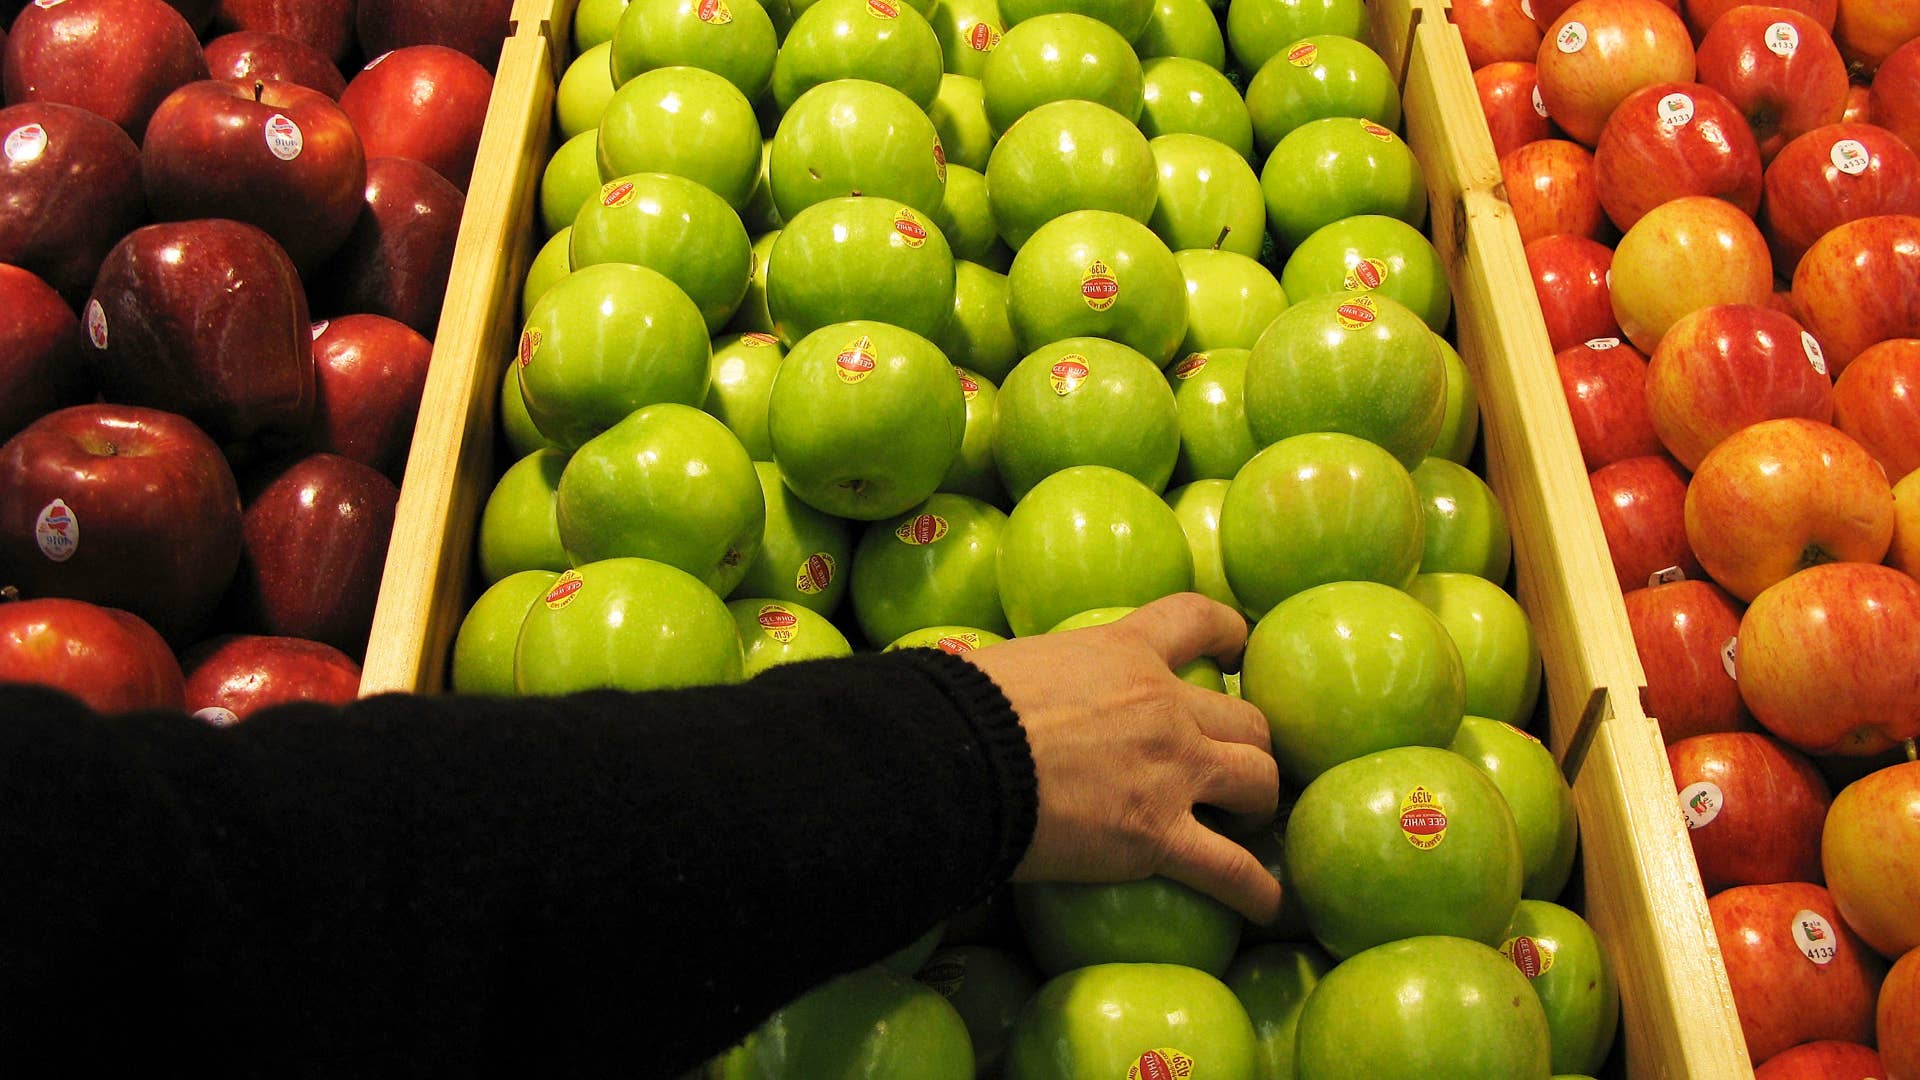 A shopper chooses granny smith apples at the newly-opened Tesco supermarket.